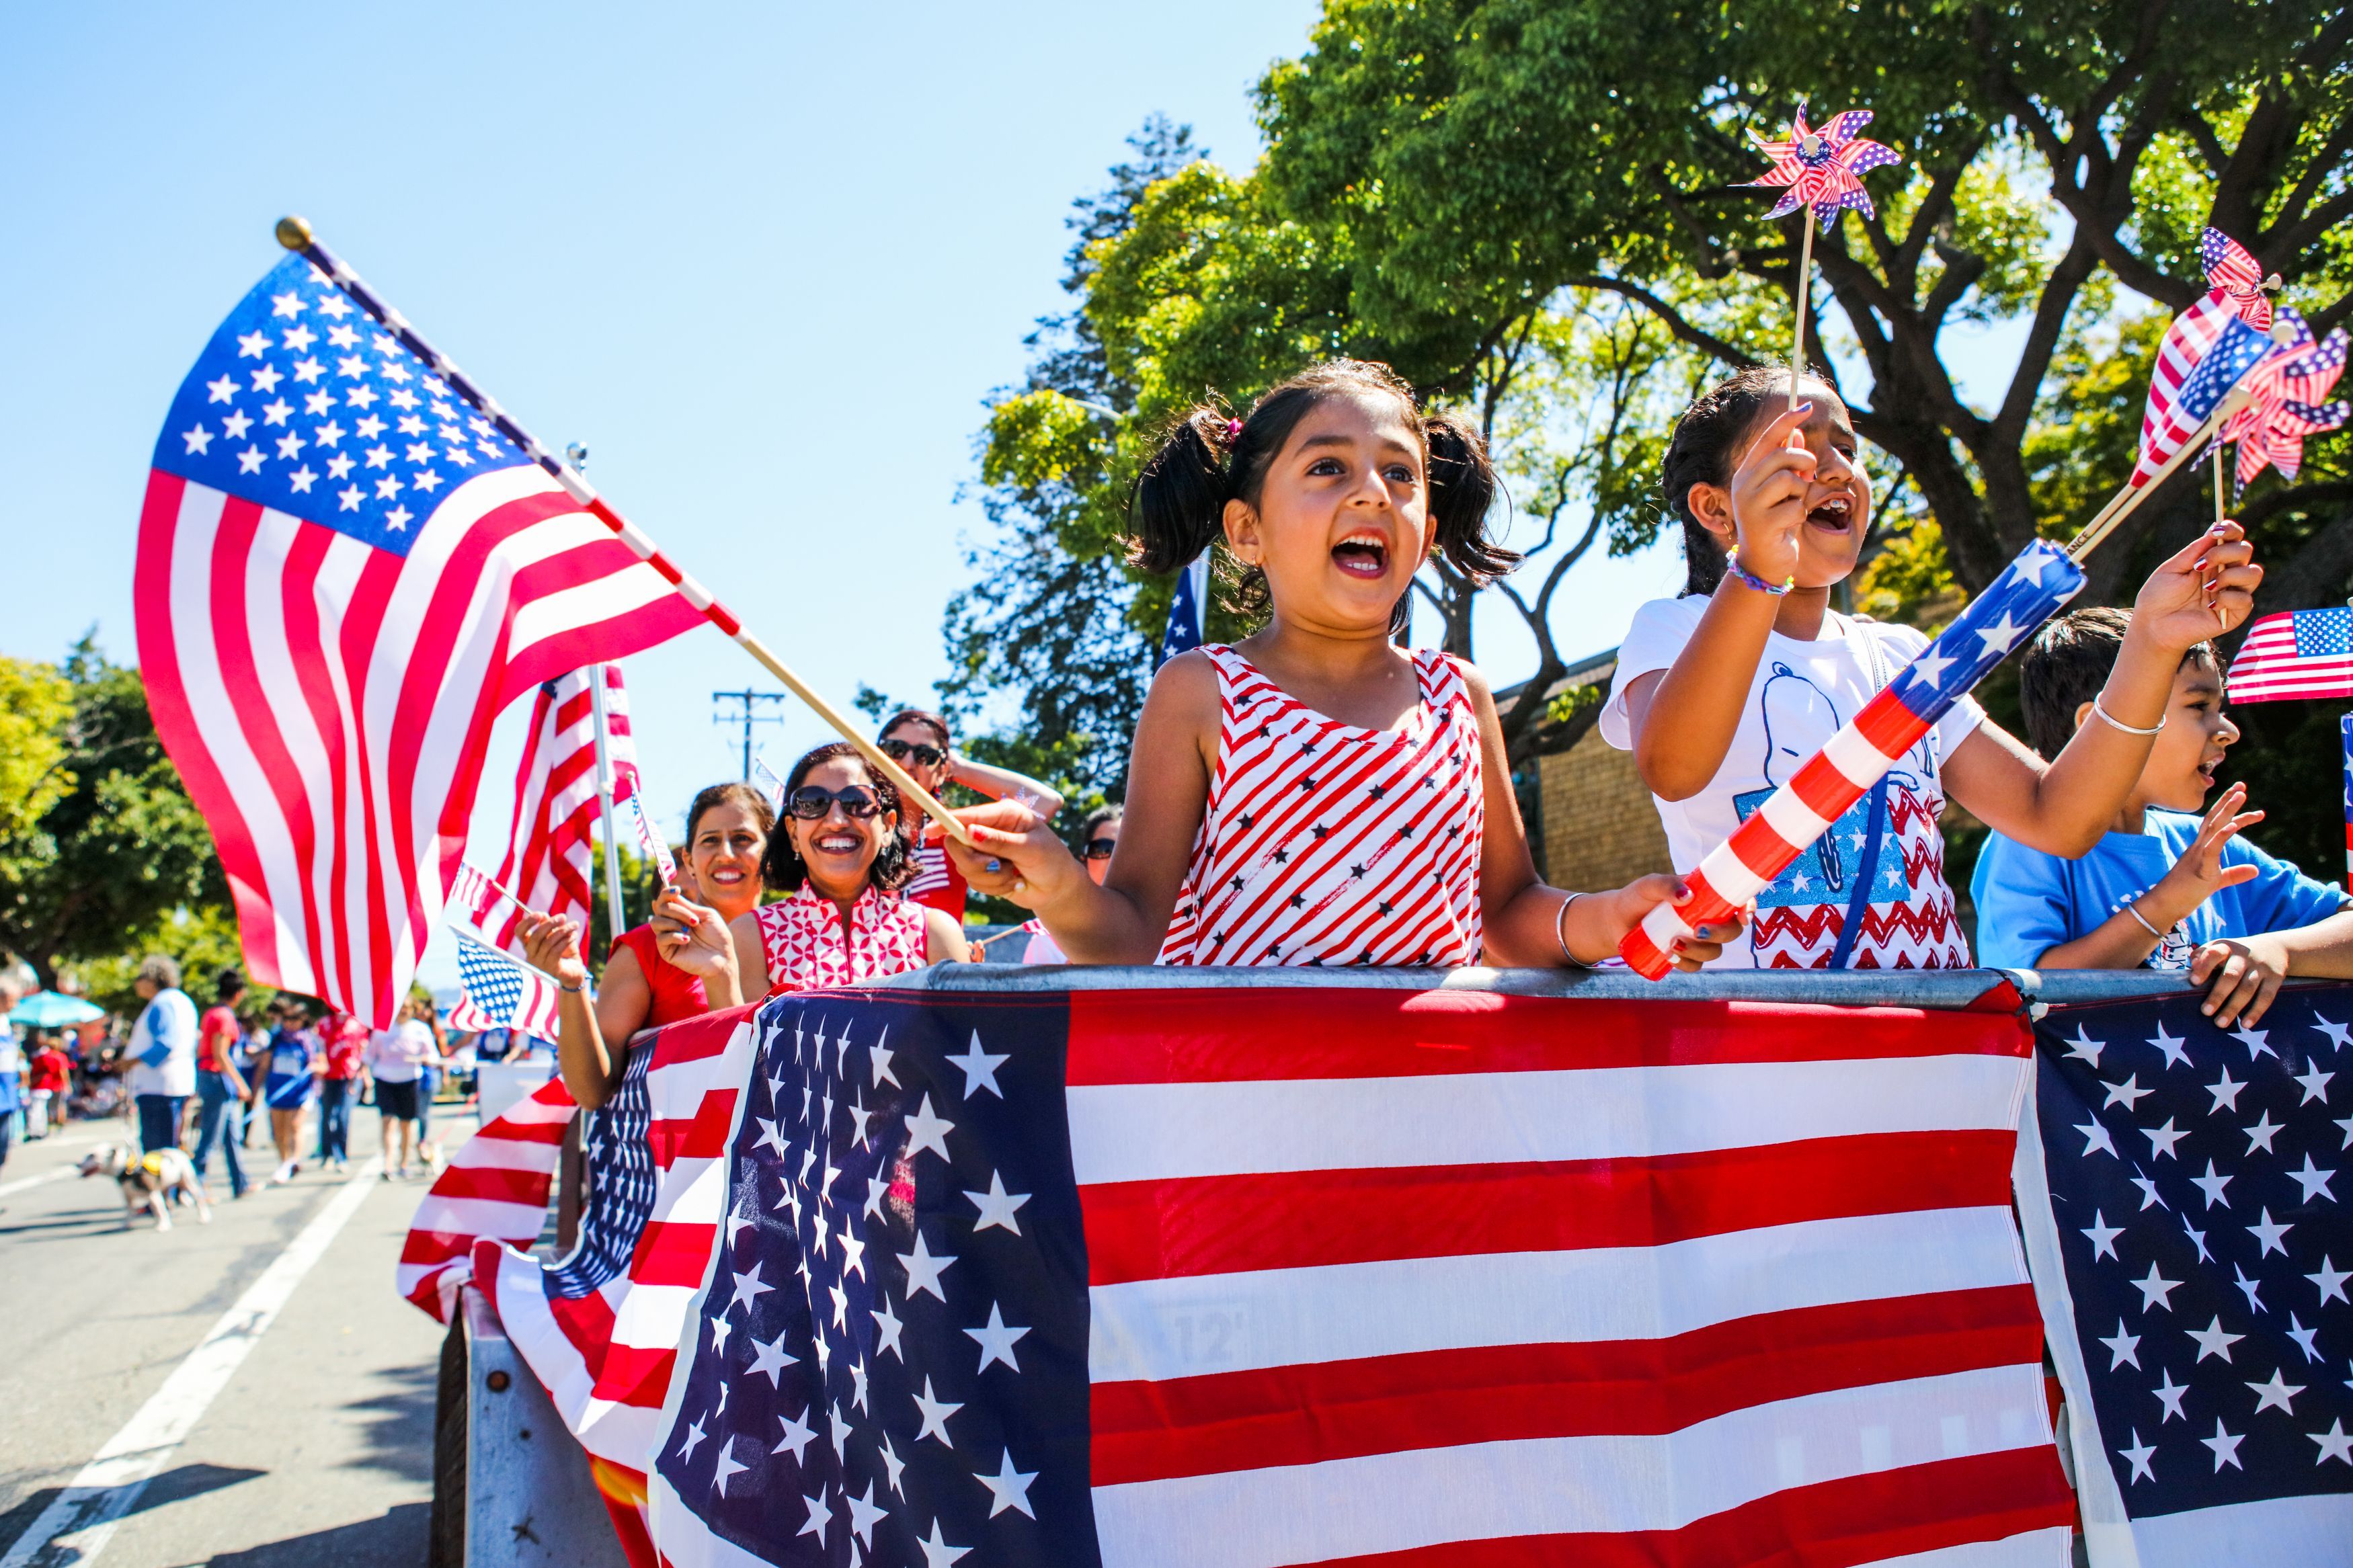 https://hips.hearstapps.com/hmg-prod/images/people-wave-american-flags-as-they-ride-through-4th-of-july-news-photo-544949778-1561130841.jpg